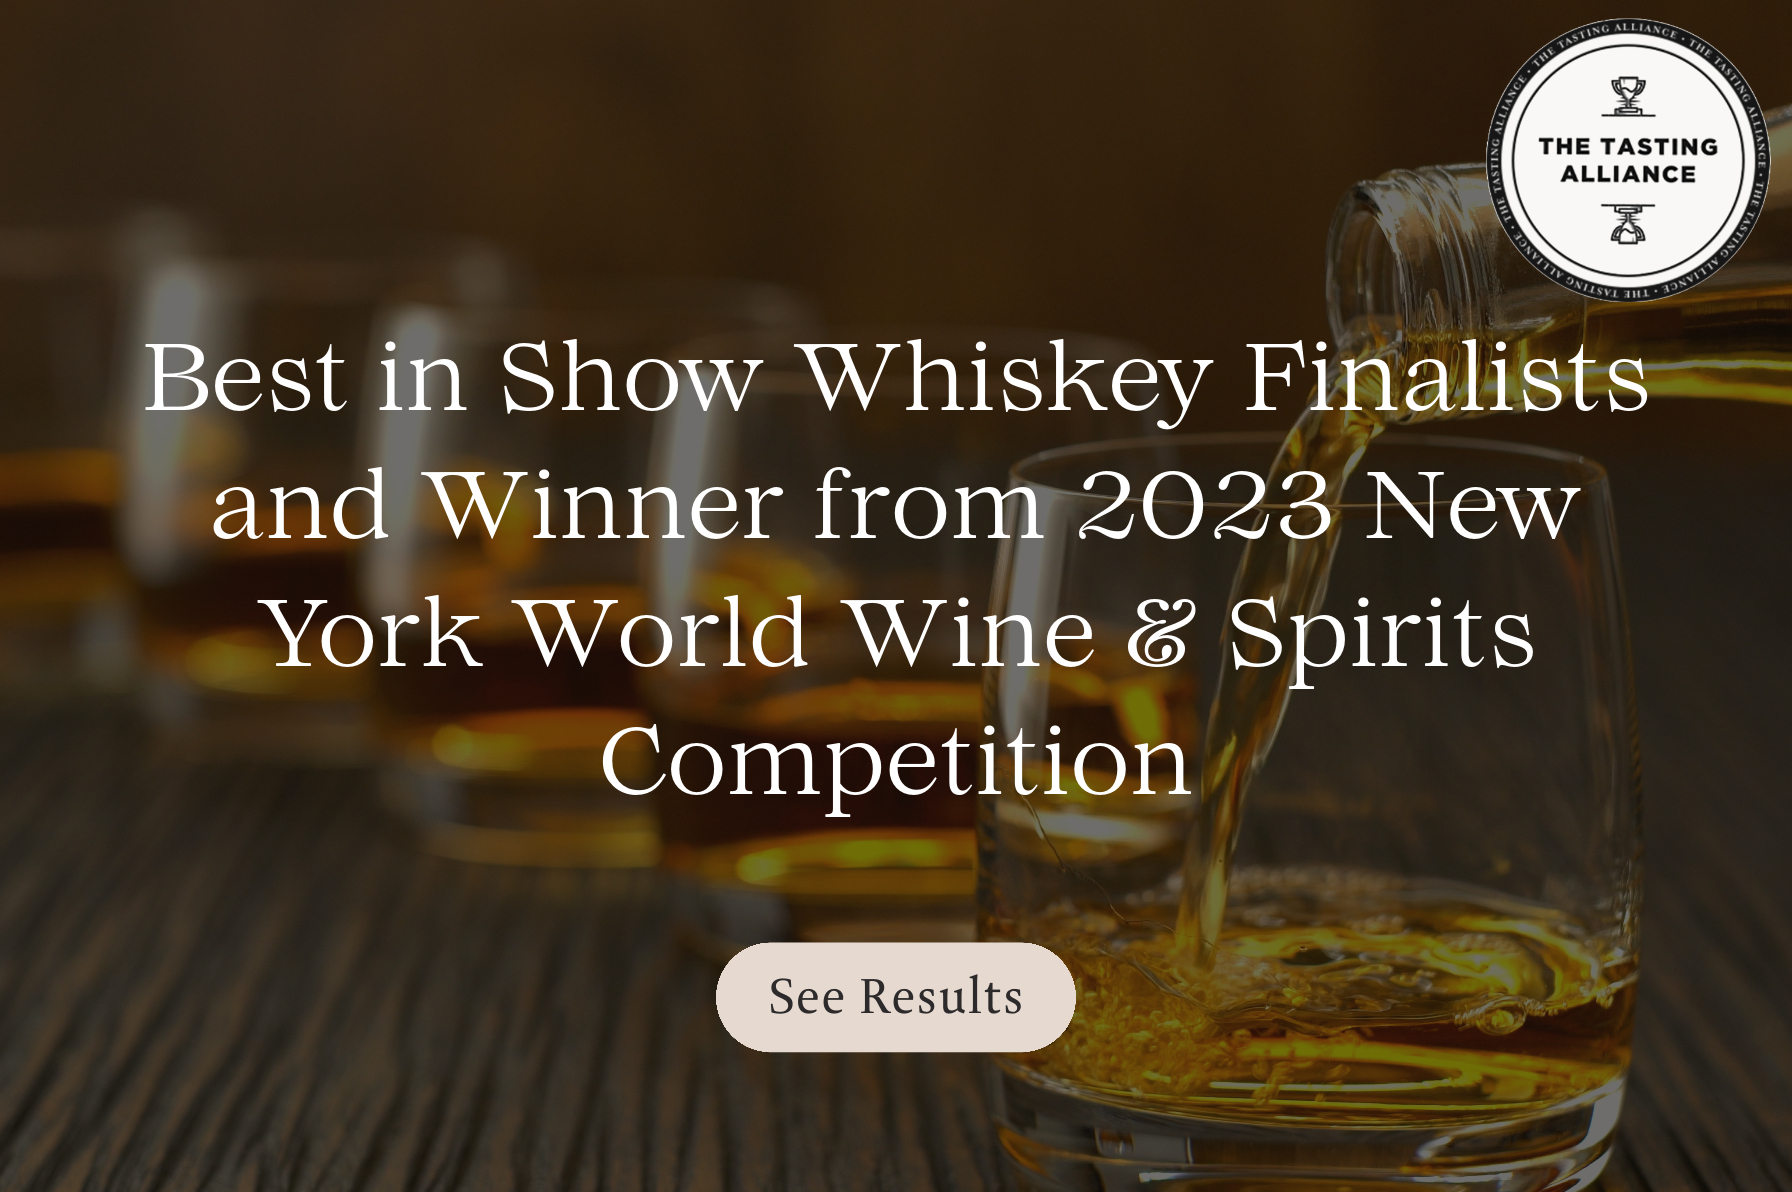 The Tasting Alliance's Best in Show Whiskey from the 2023 New York World Wine & Spirits Competition